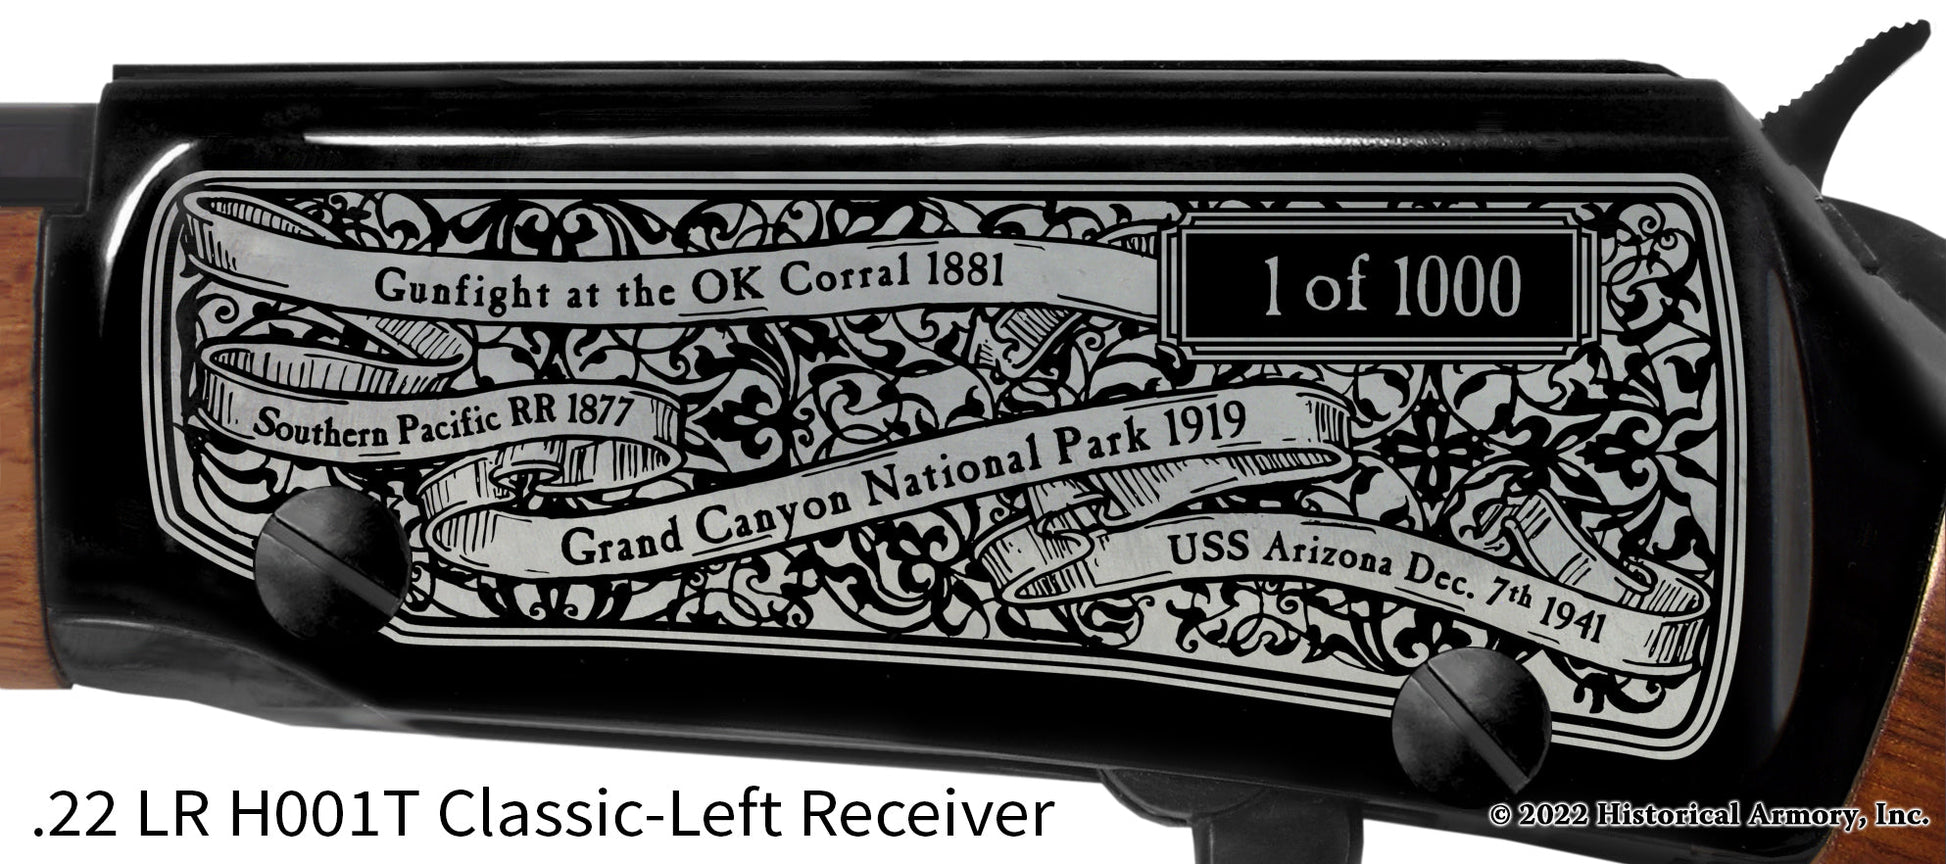 Arizona State Pride Engraved H00T Receiver detail Henry Rifle